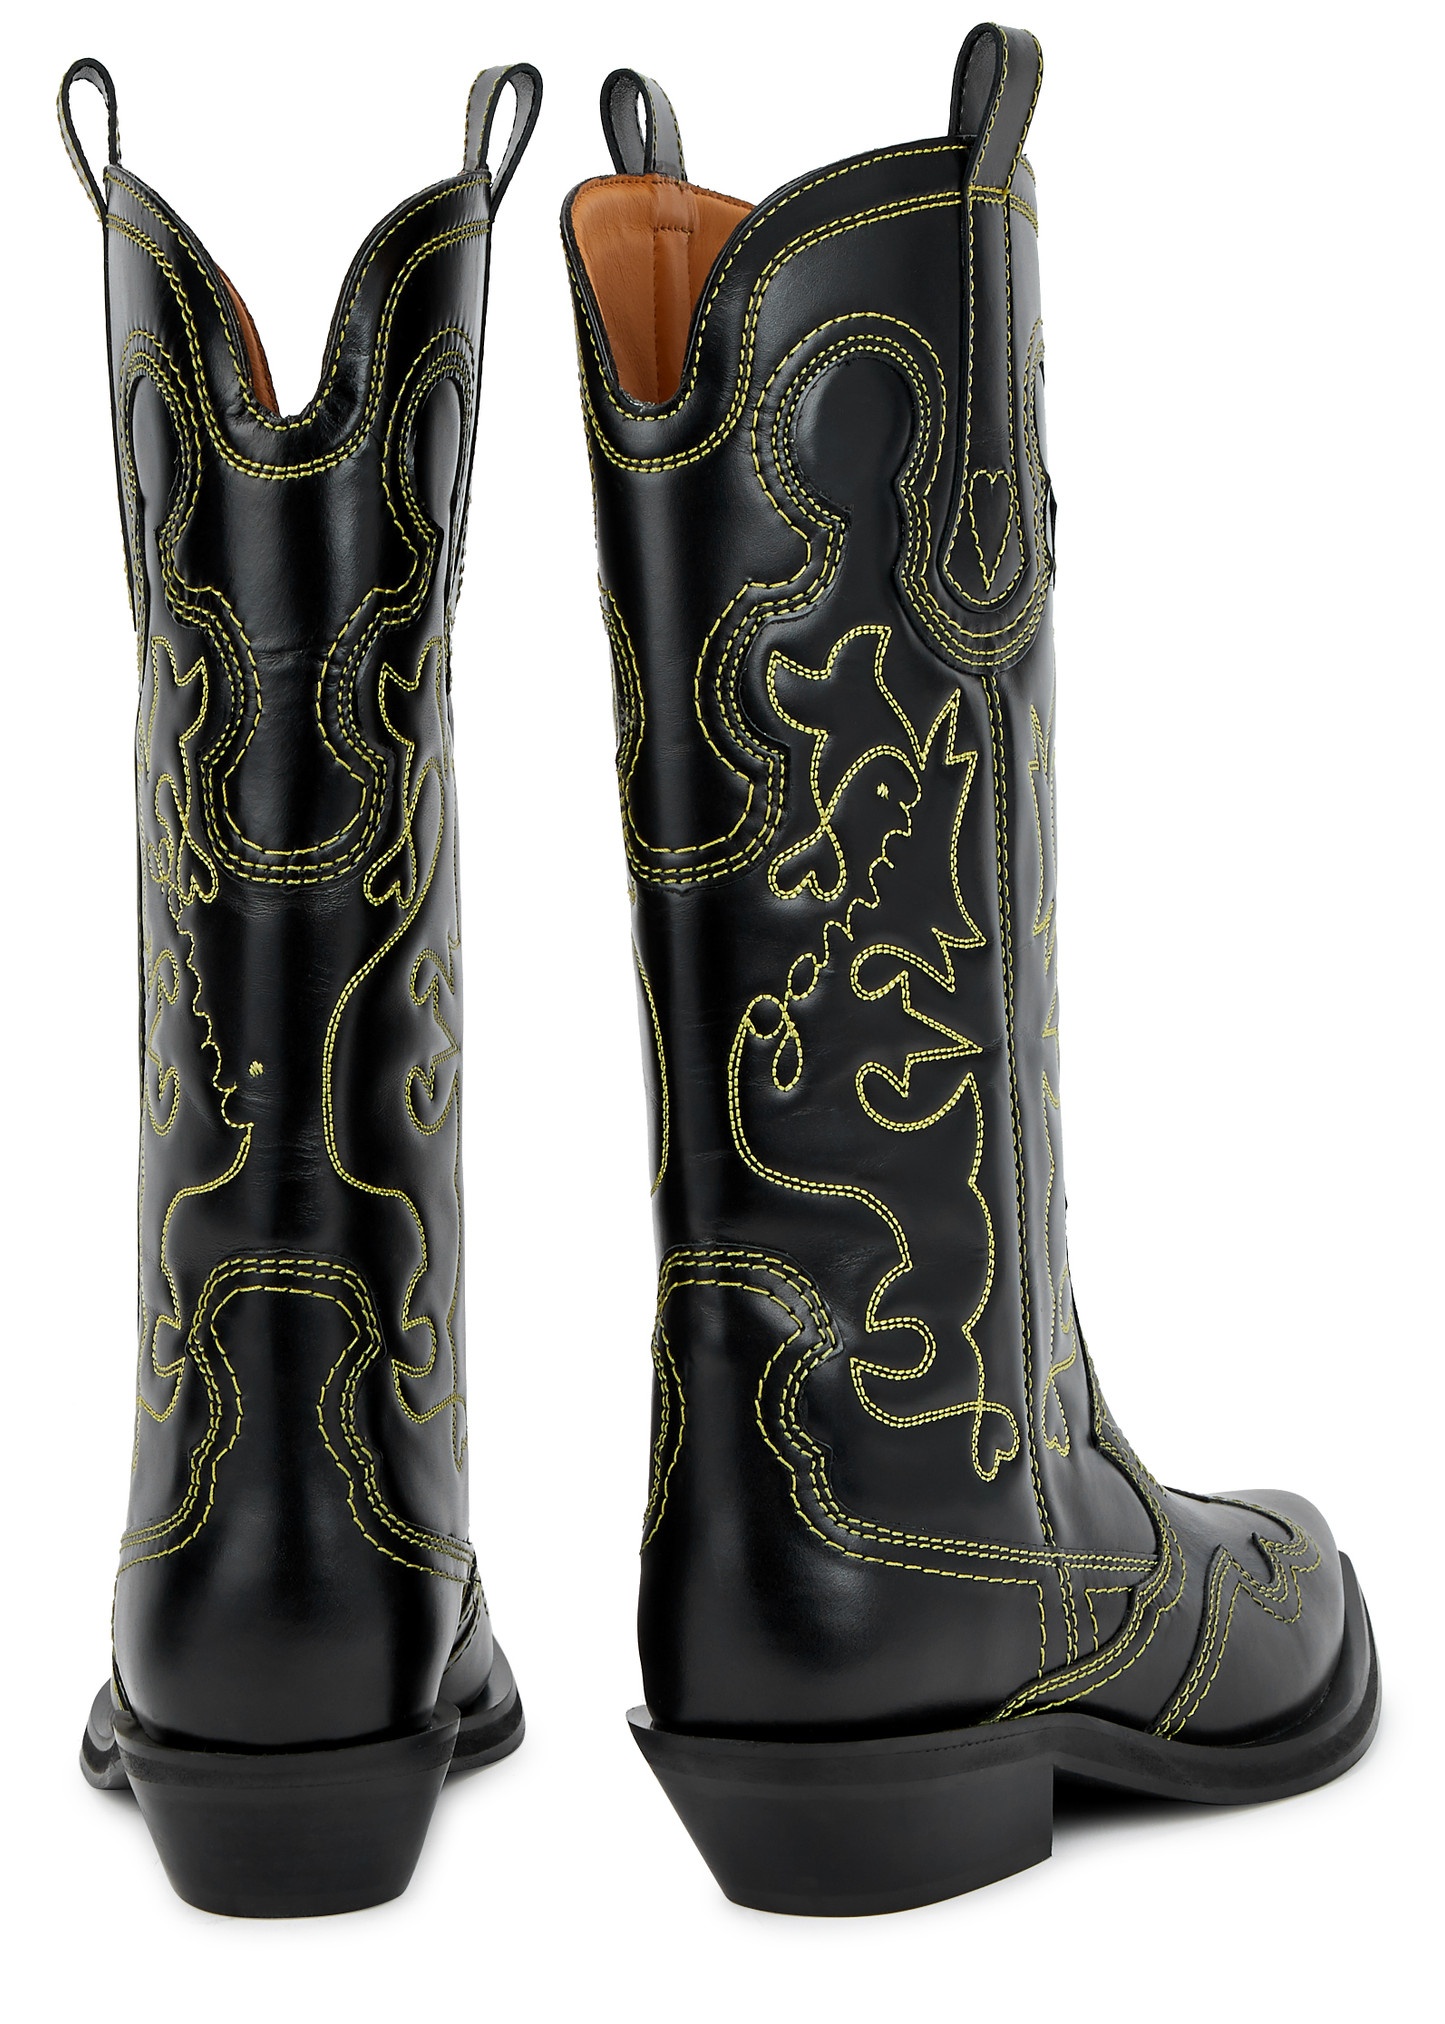 Embroidered leather cowboy boots - 3